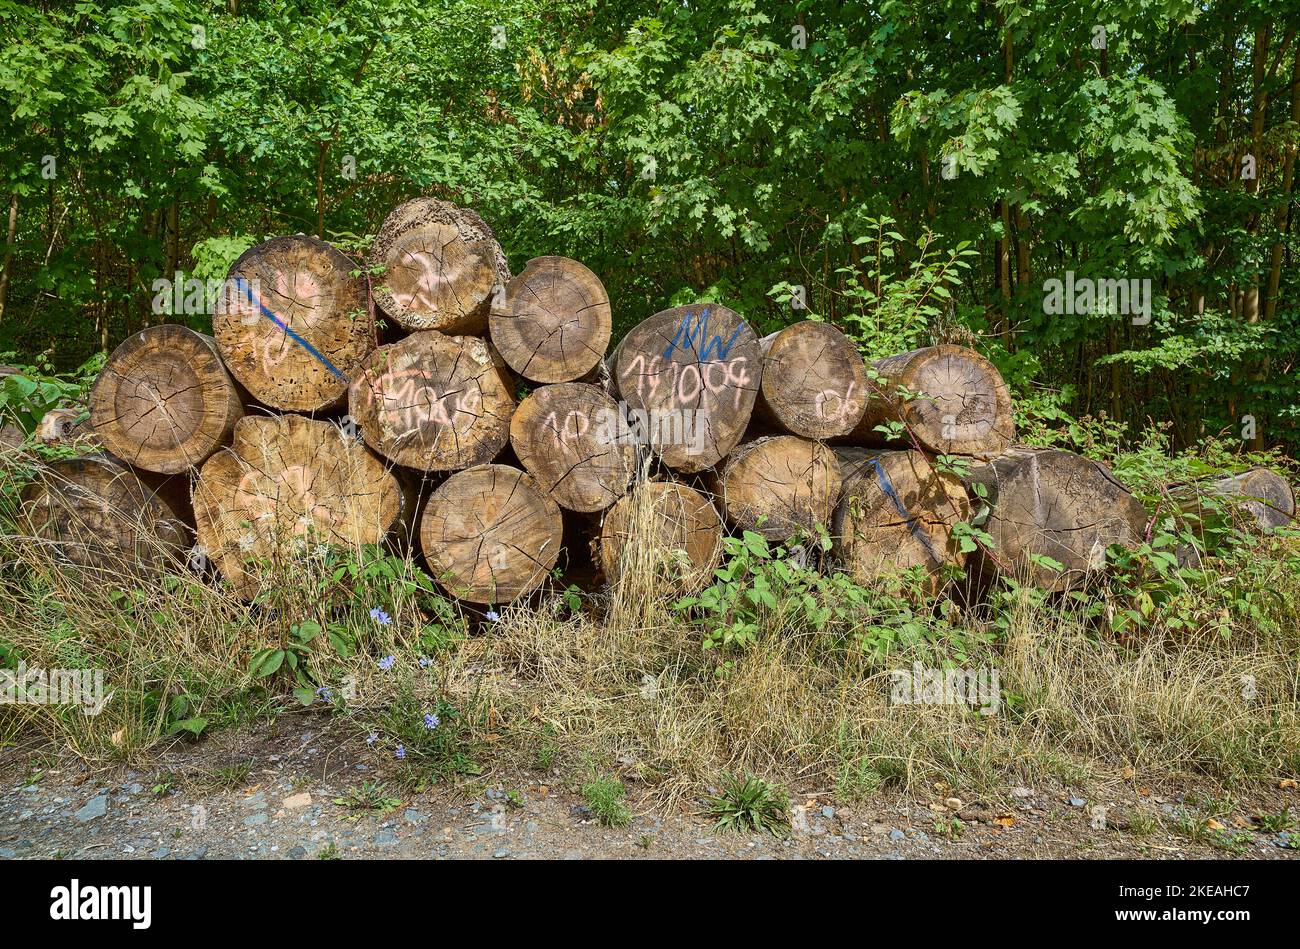 Scotch pine, Scots pine (Pinus sylvestris), pile of poor pine wood, damaged by dryness and heat which promoted Diplodia-Fungi and bark beetles, Stock Photo